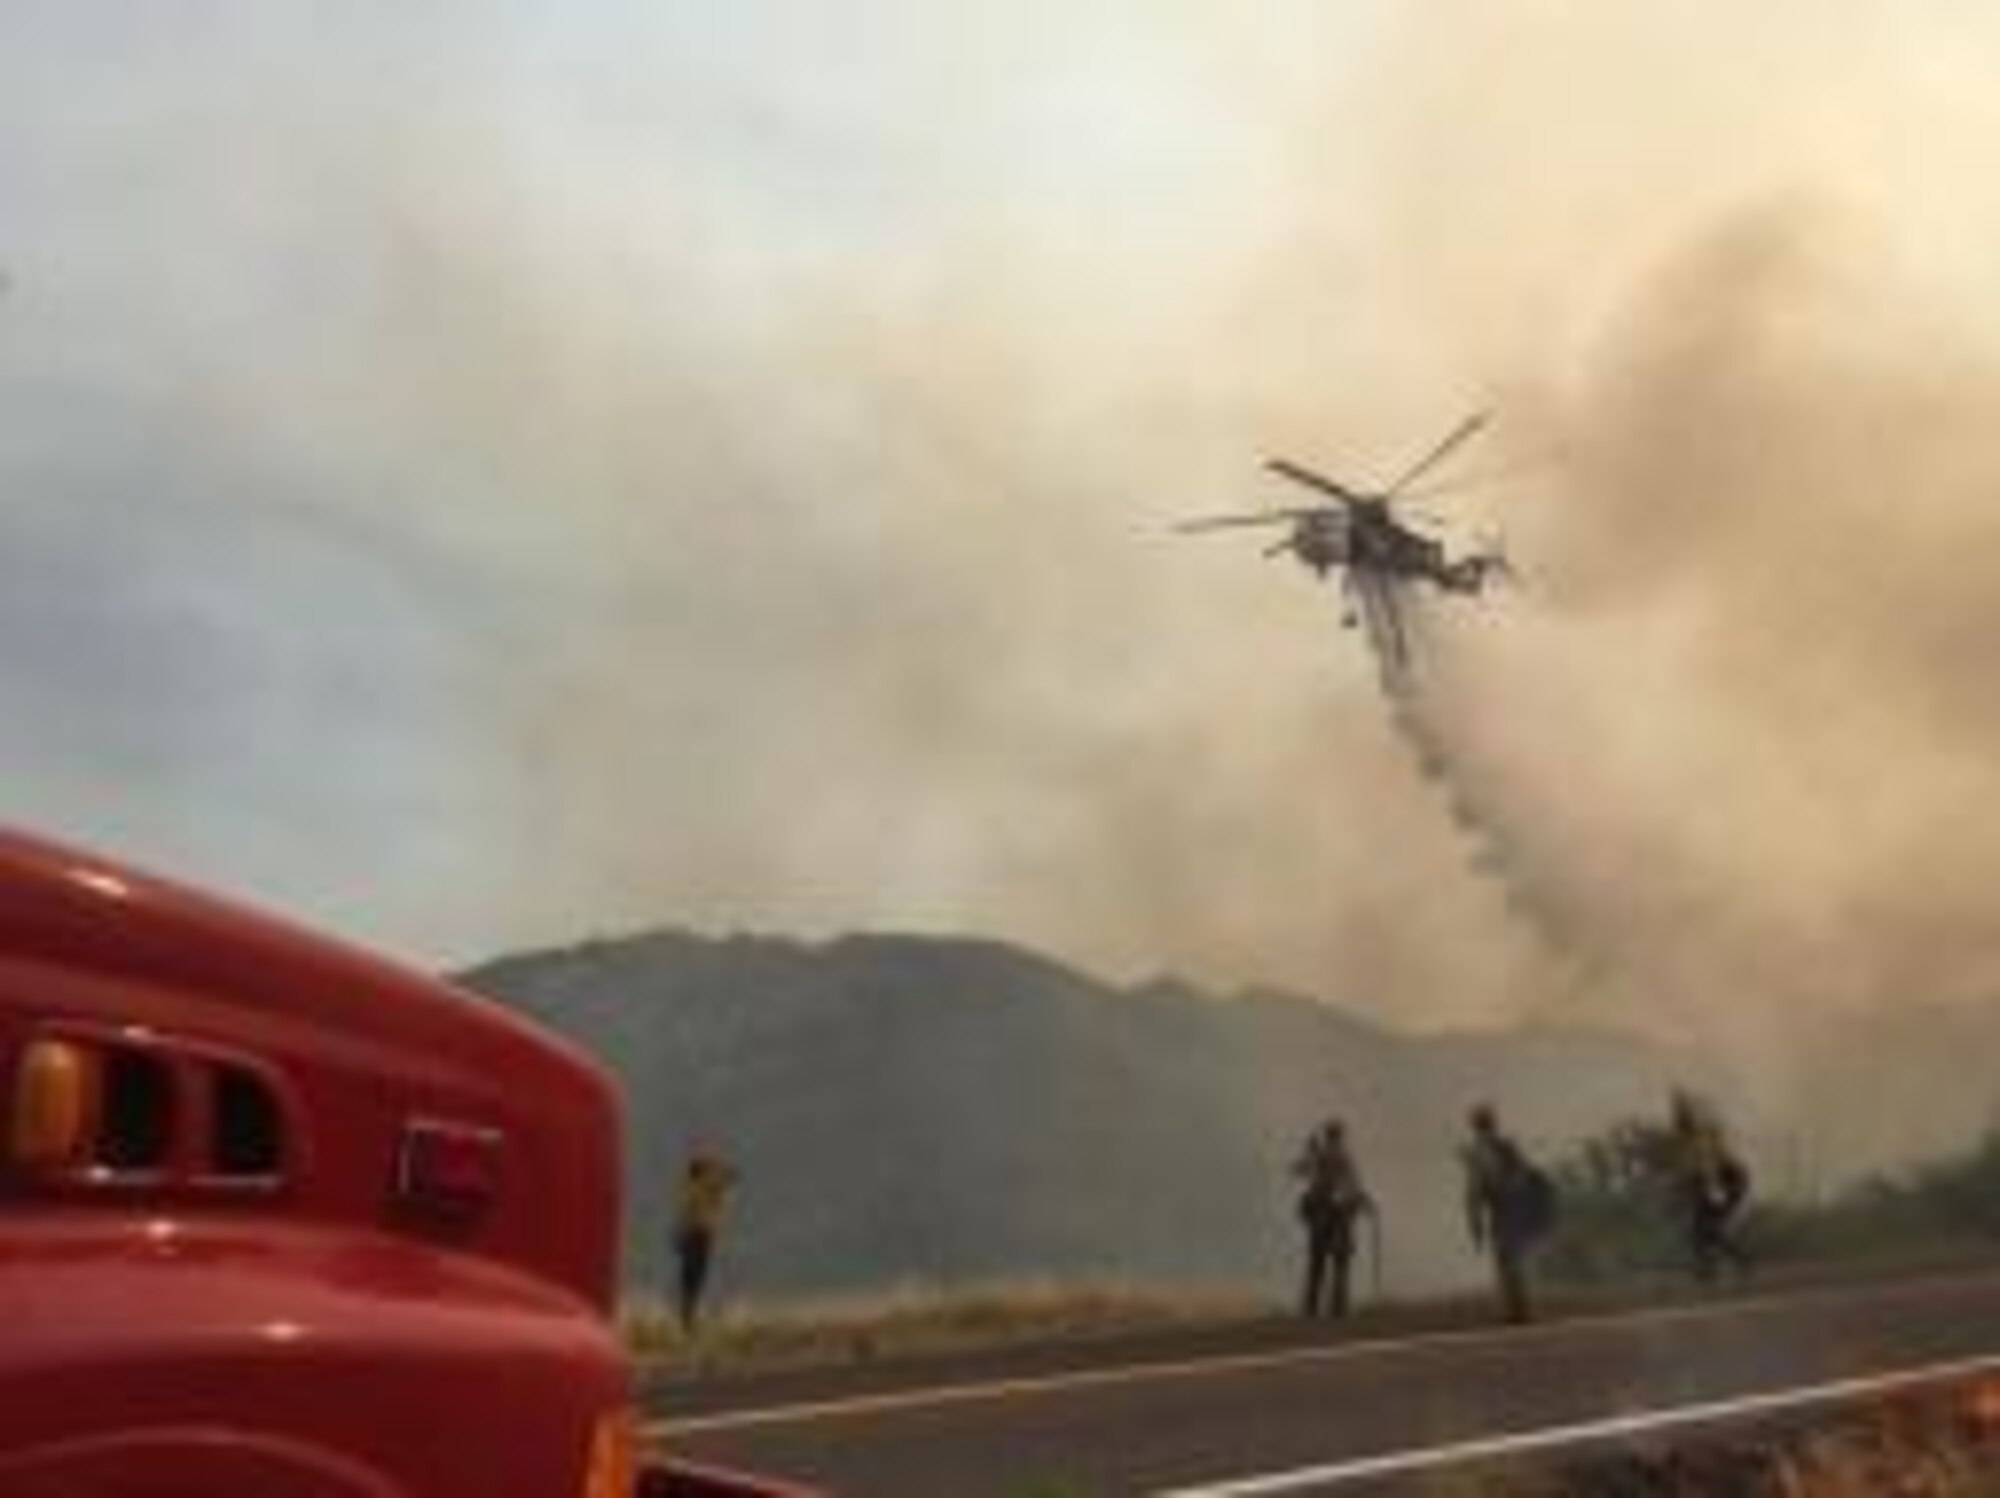 Firefighters from the Arizona Air National Guard’s 162nd Wing answered a call for assistance in battling the Frye Fire near Safford, Arizona. On June 20, 2017 the 162nd Wing received an order to activate three citizen-Airmen in support of the Frye Wildland Fire incident management team’s aviation section.  The Airmen’s training and expertise equipped them to assist the state and community fight the blaze. (U.S. Forest Service photo)